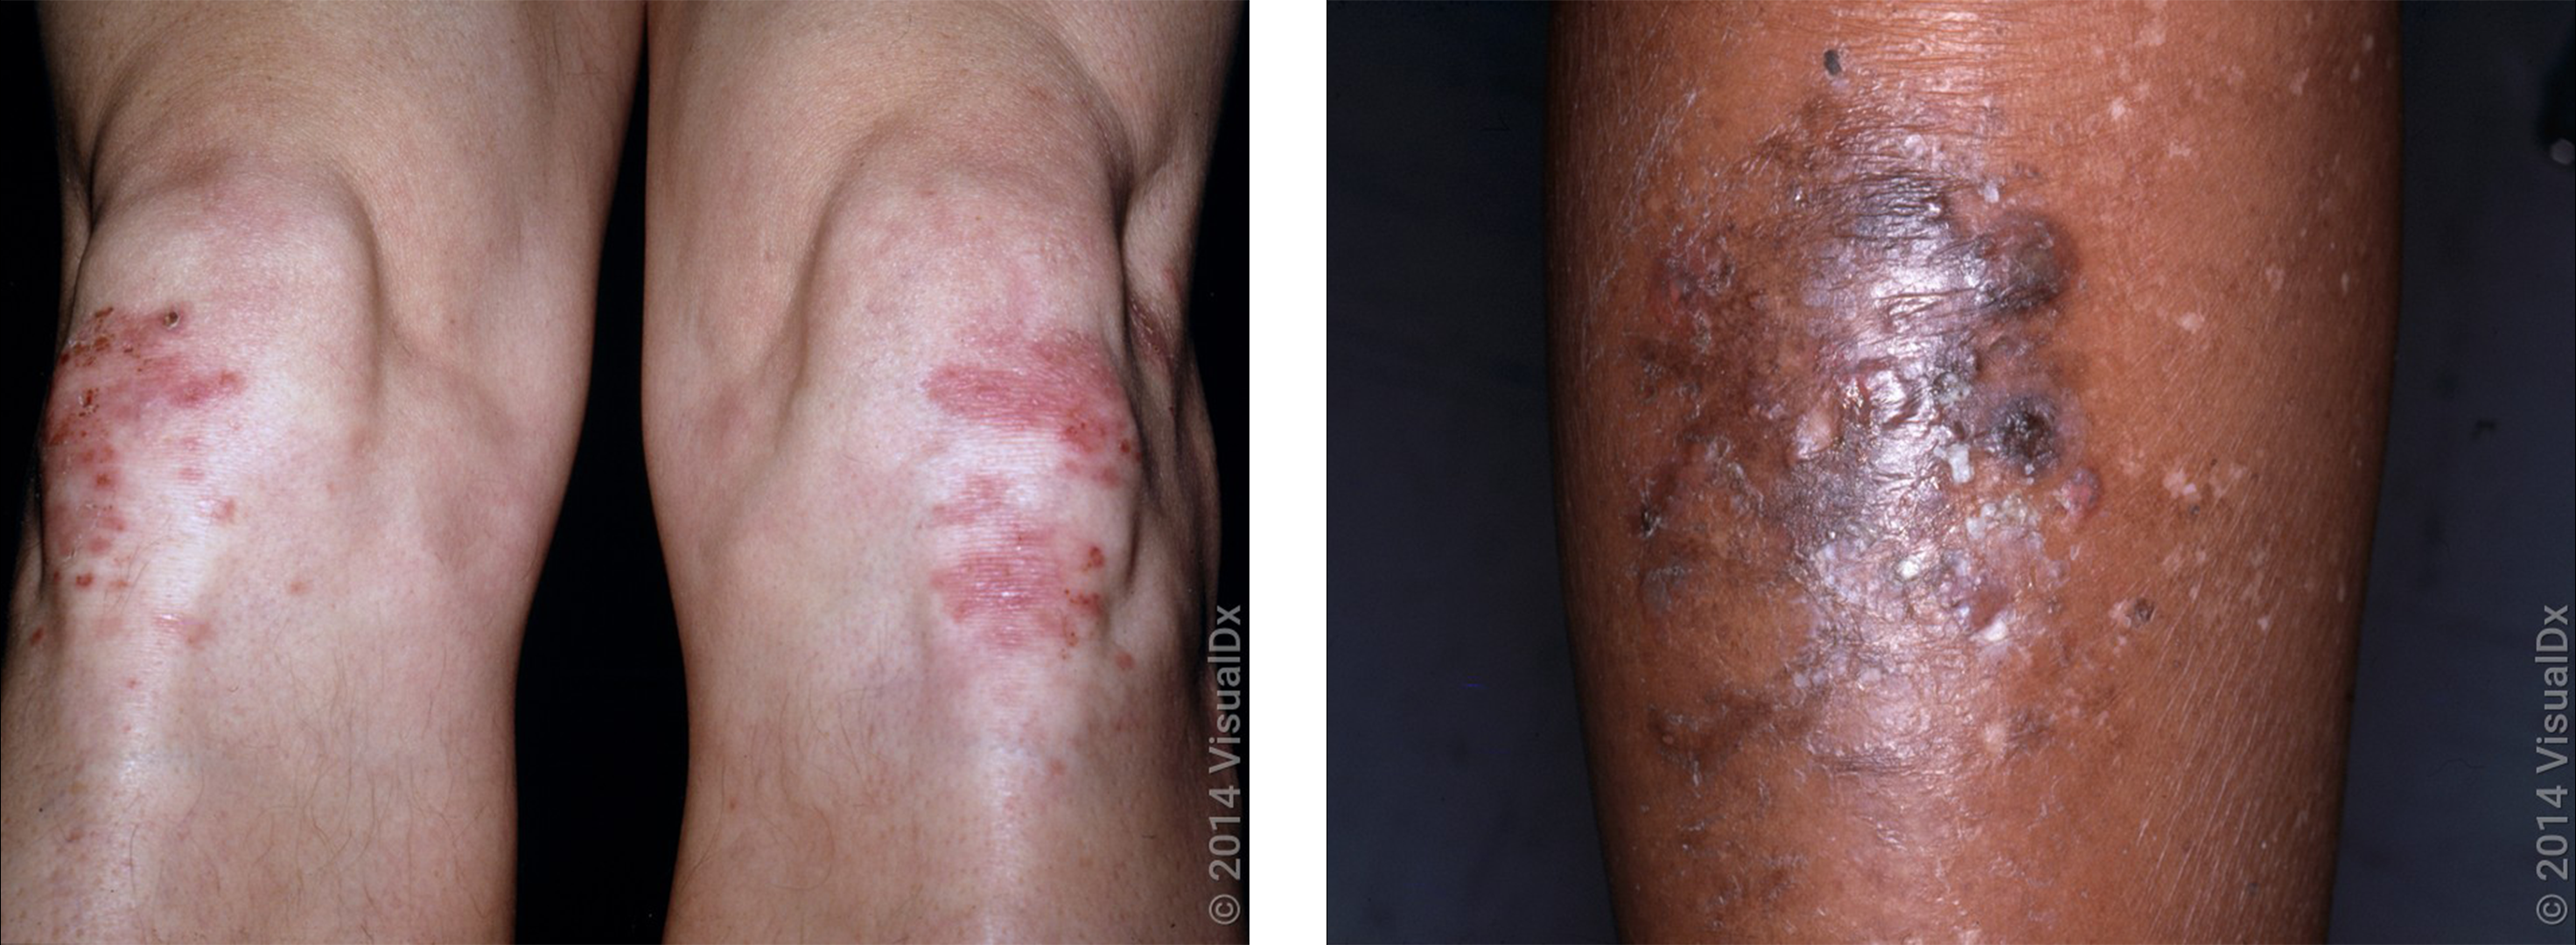 Left: Pink sores and crusts on the knees in autoimmune dermatitis herpetiformis. Right: Close-up of blisters and dark patches on the shin rm in autoimmune dermatitis herpetiformis.